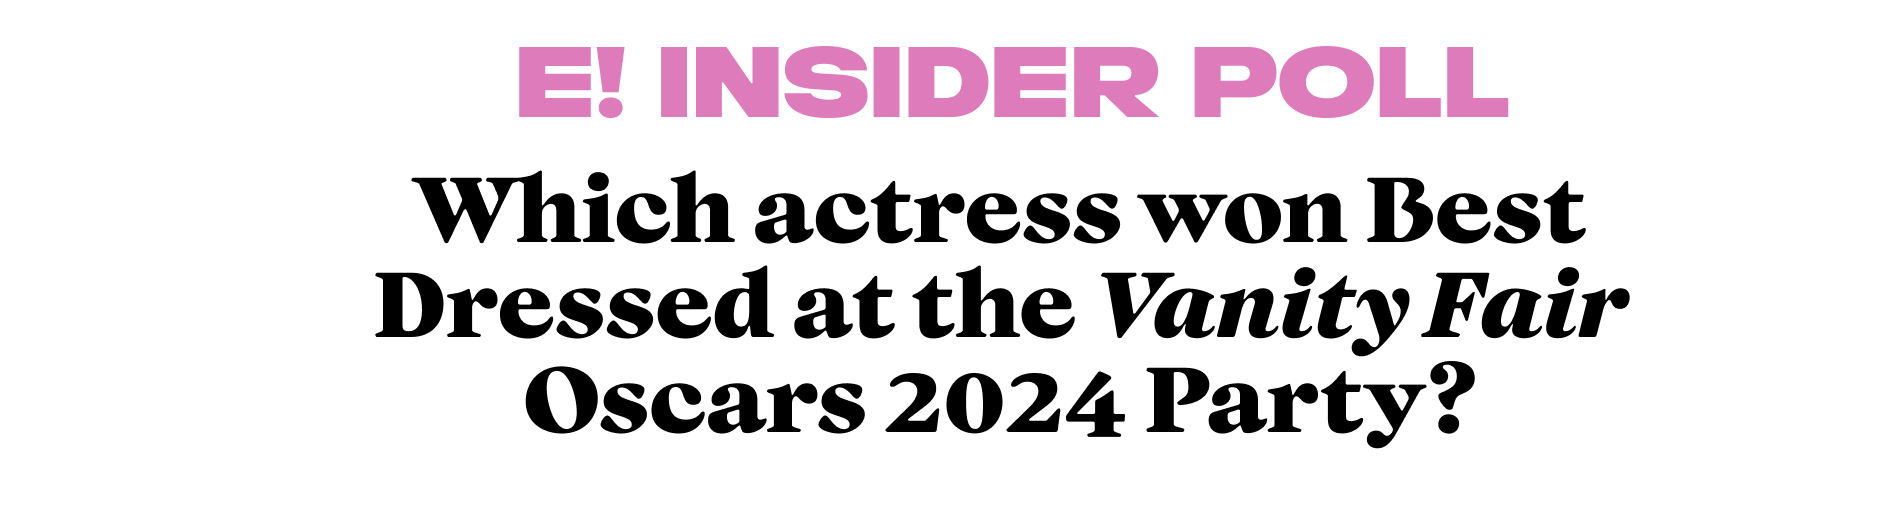 Which actress won Best Dressed at the Vanity Fair Oscars 2024 Party?